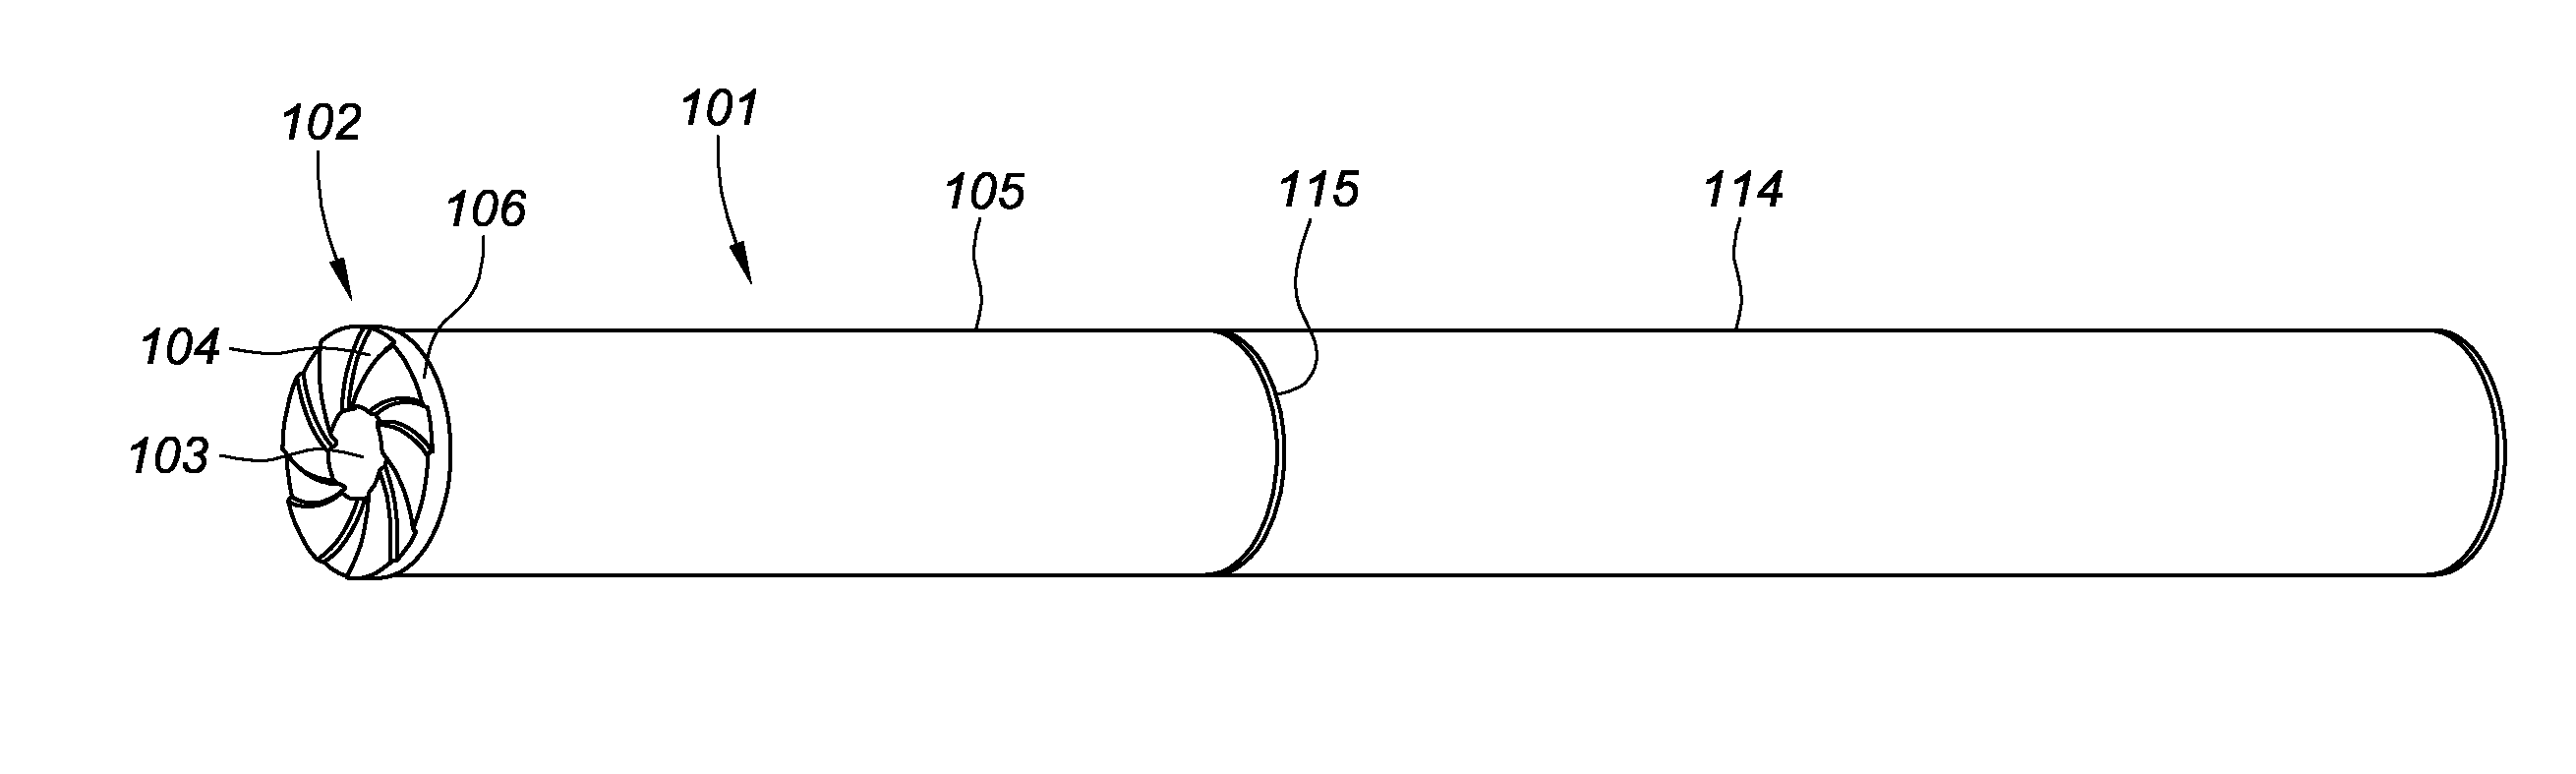 Device for storing and vaporizing liquid media